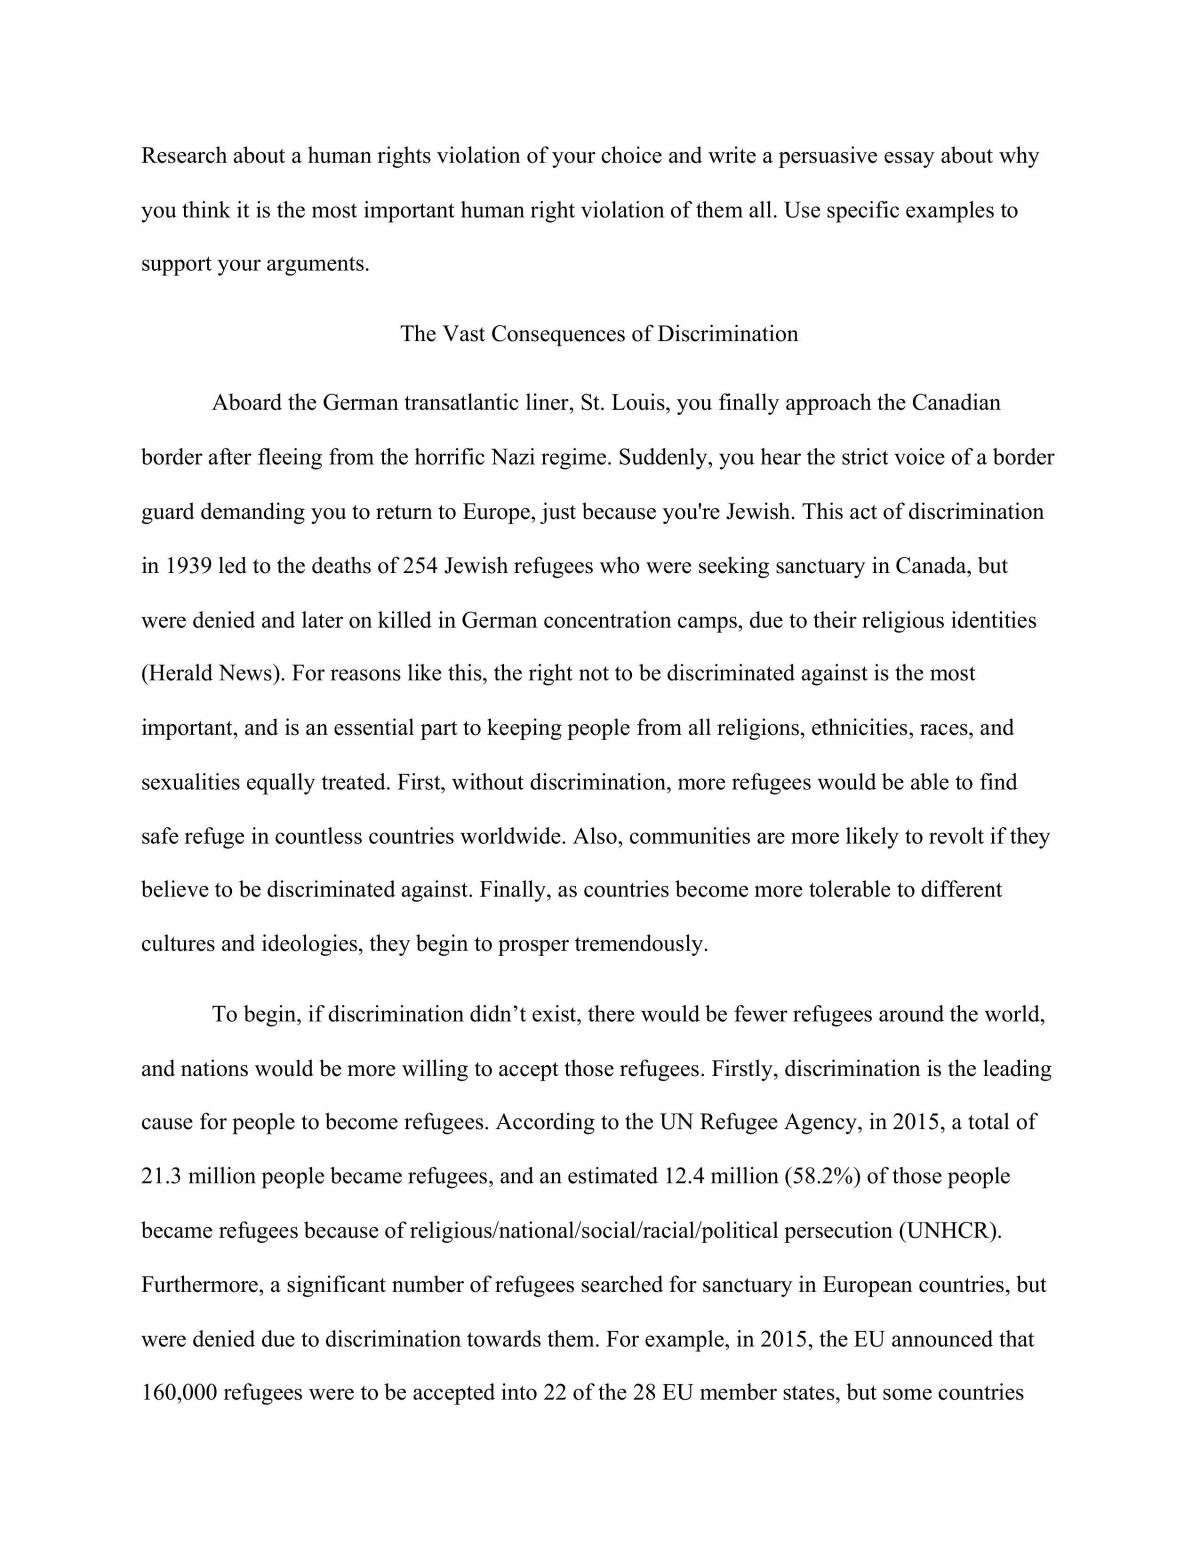 argumentative essay about discrimination in the philippines